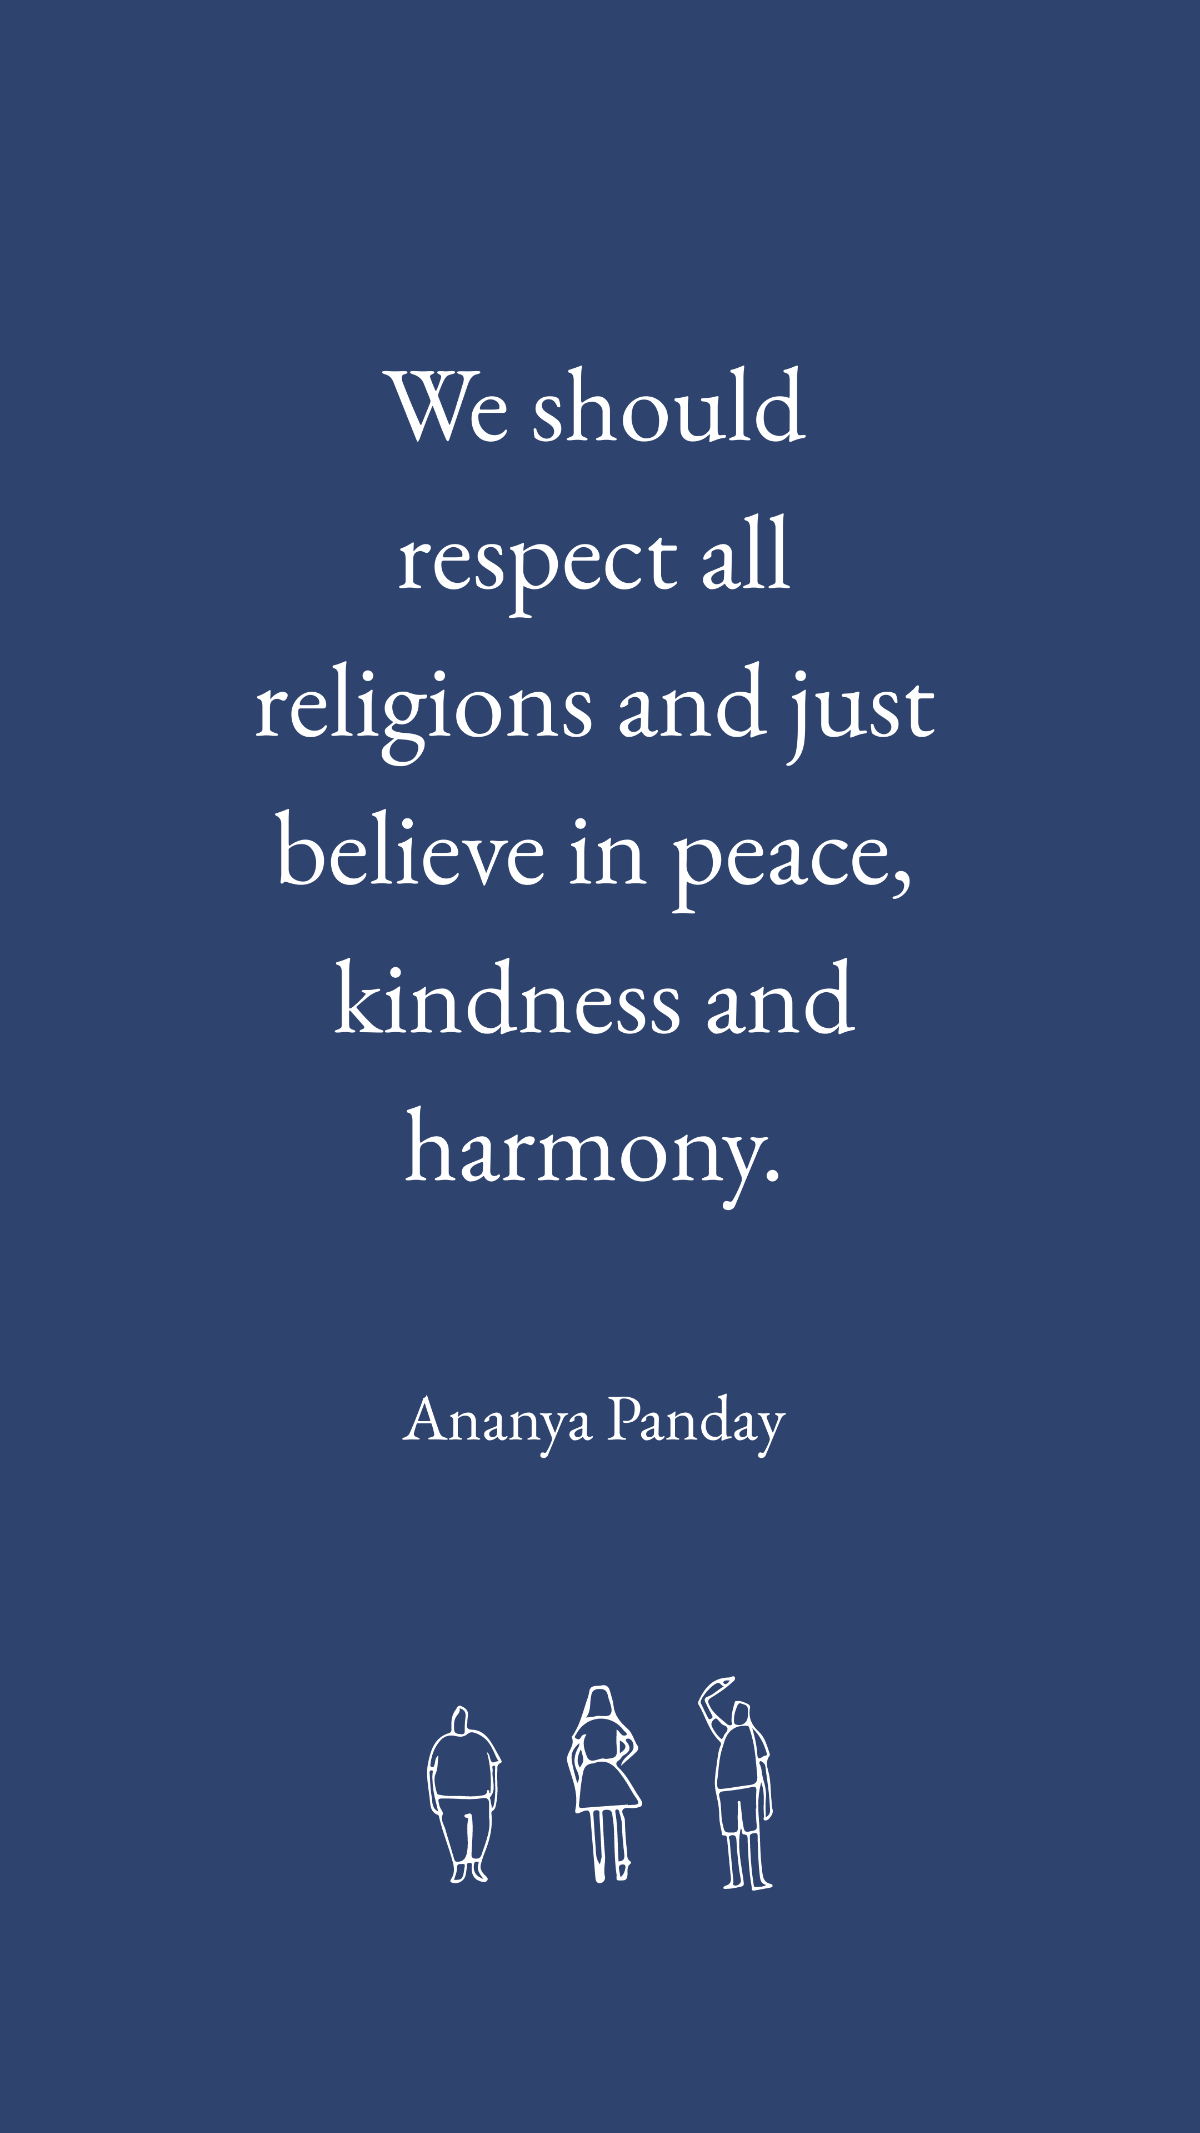 Ananya Panday - We should respect all religions and just believe in peace, kindness and harmony.